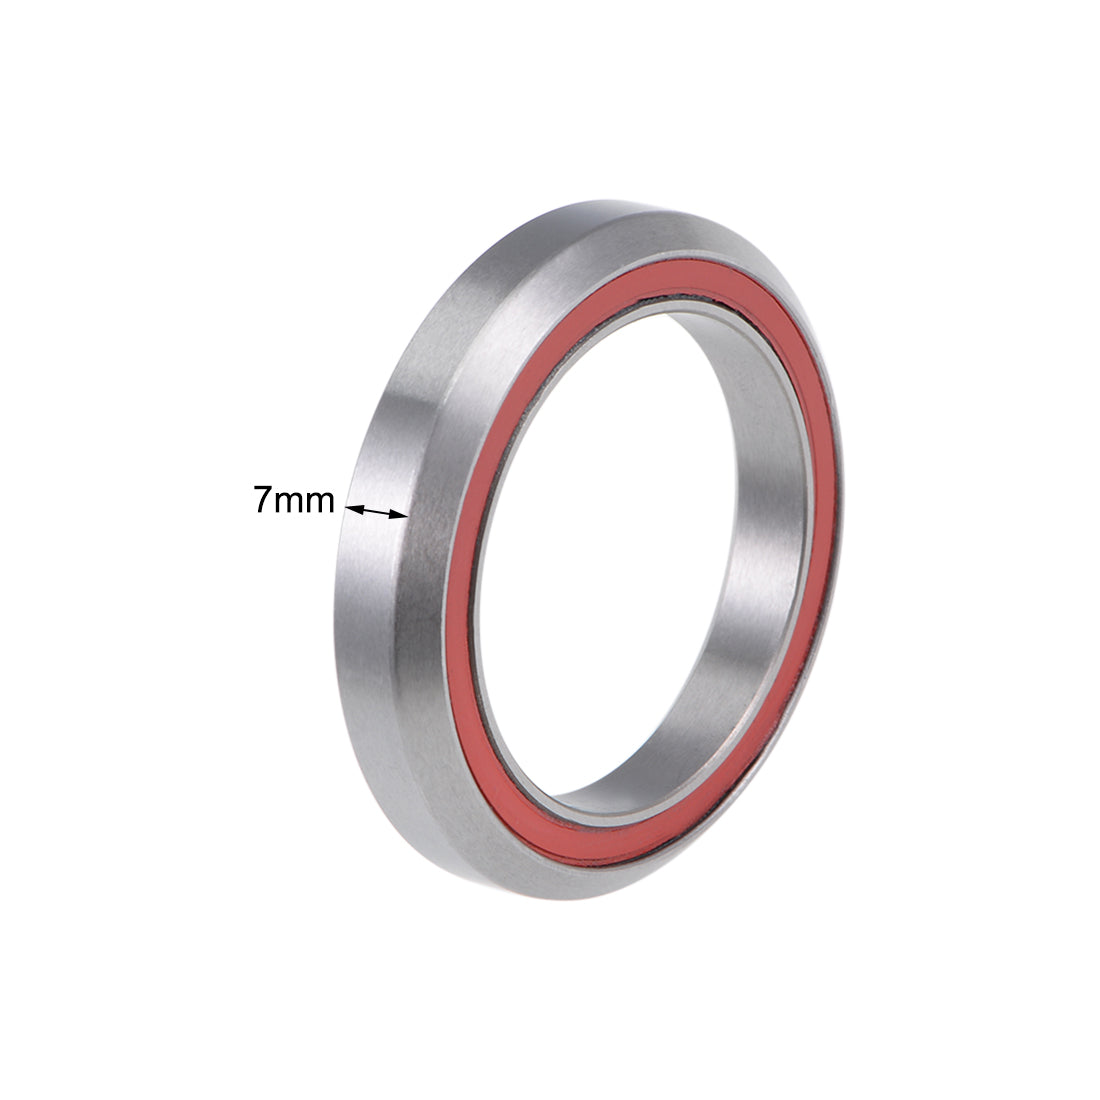 Uxcell Uxcell MH-P08H7 Bicycle Headset Bearing 30.15x41.8x7mm Sealed Chrome Steel Bearings